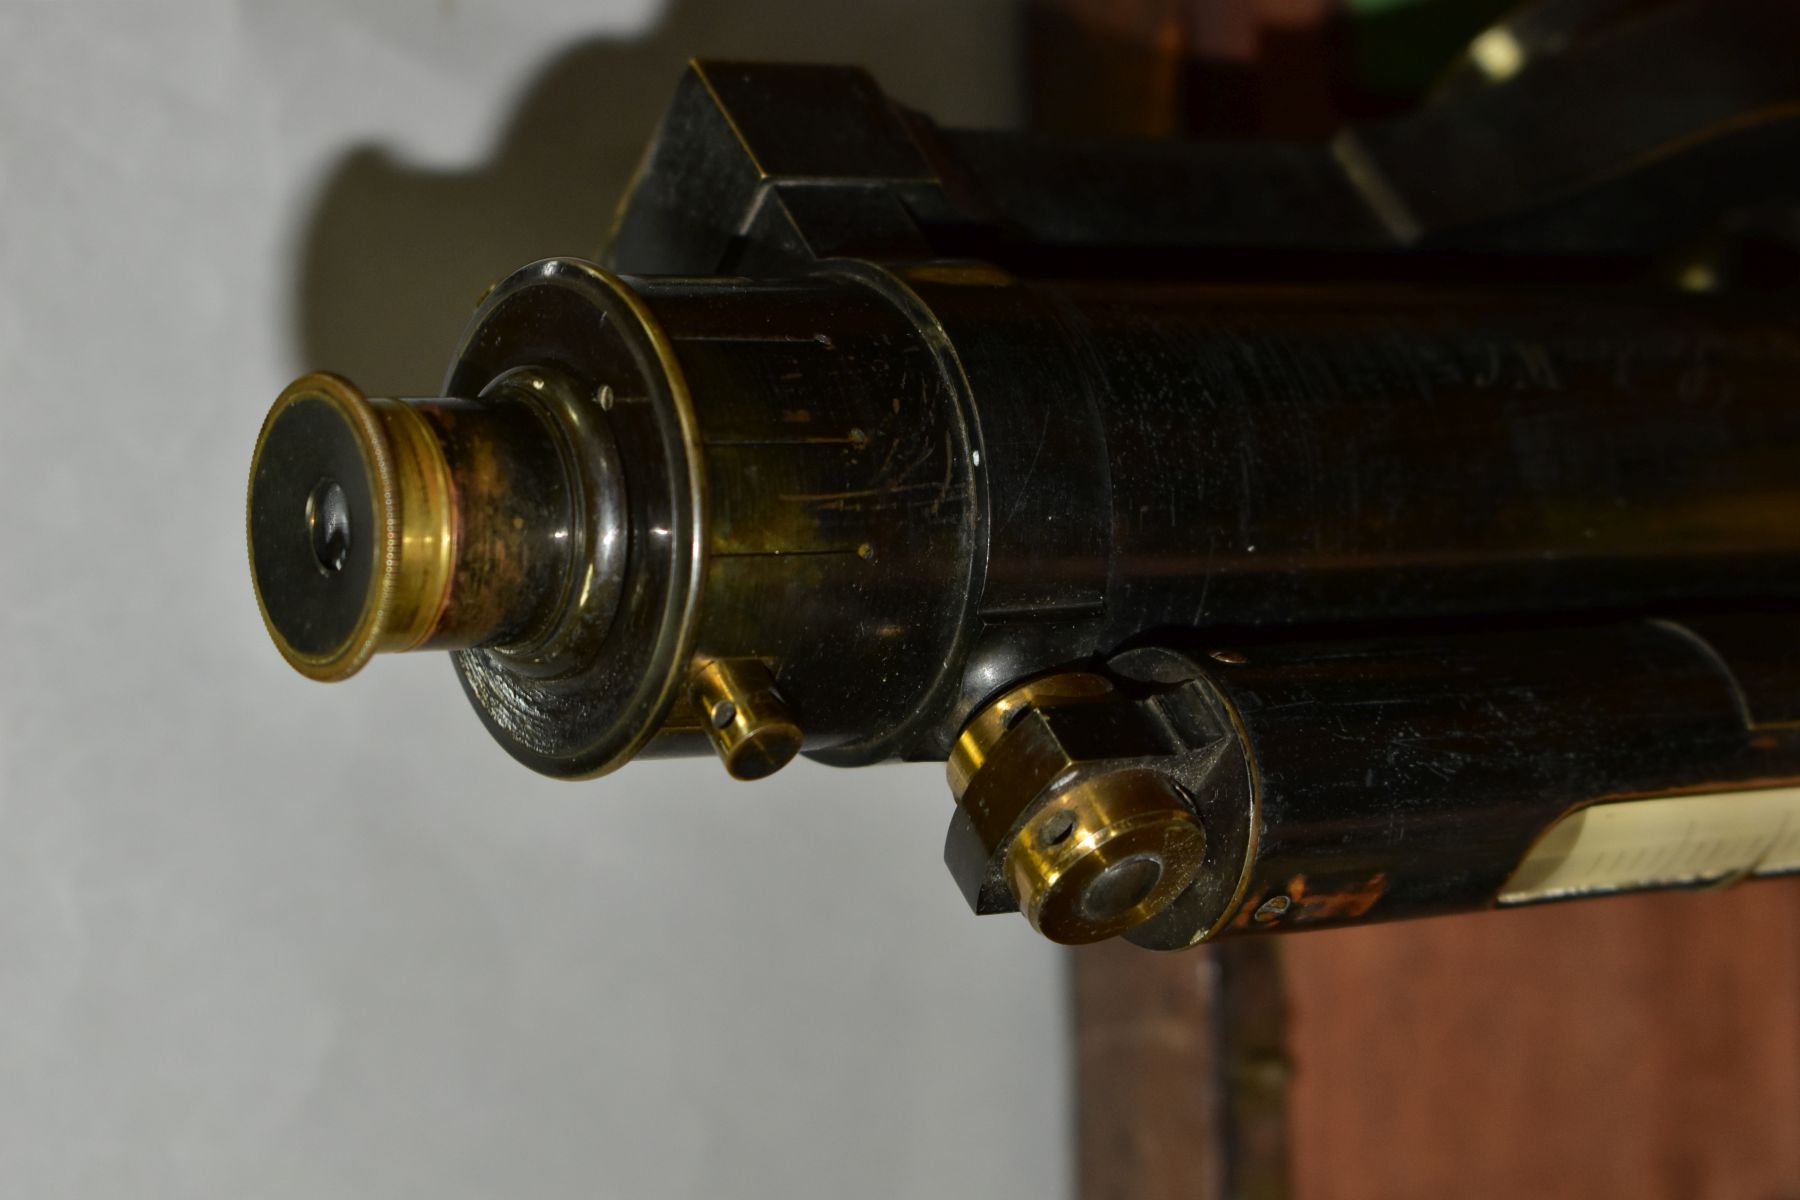 A STANLEY SURVEYORS DUMPY LEVEL IN A FITTED MAHOGANY BOX, the level comes with the tripod mounting - Bild 5 aus 6